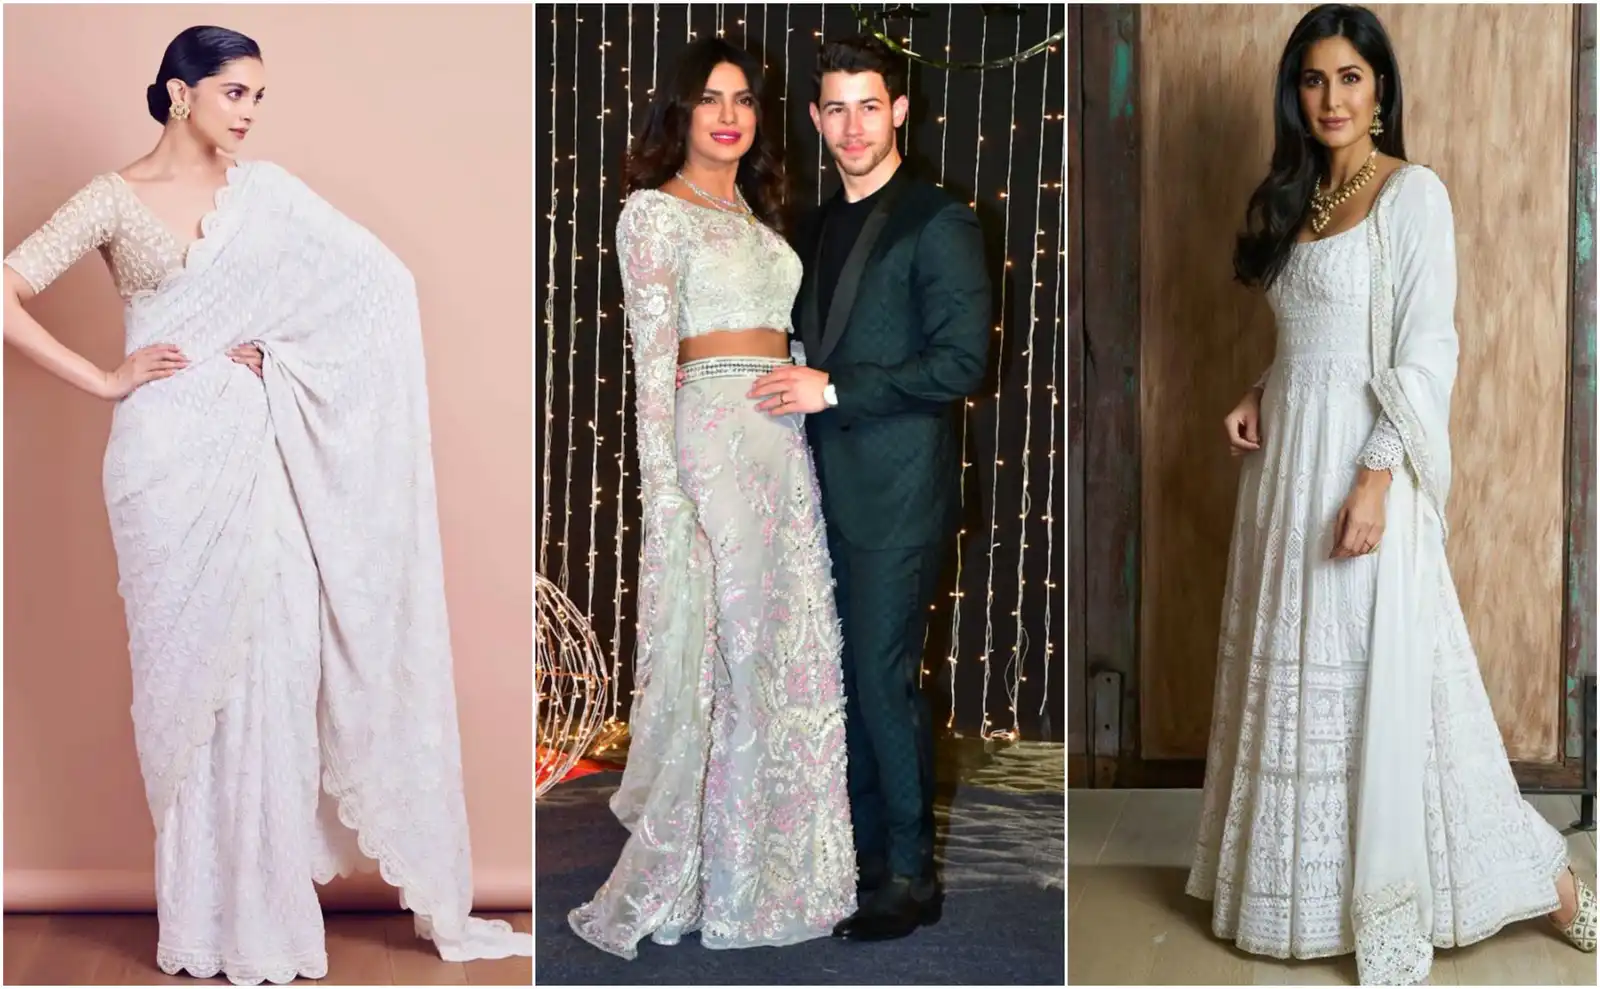 10 Hottest Bollywood Divas Show Us How To Wear THE Festive Color Of The Year, White